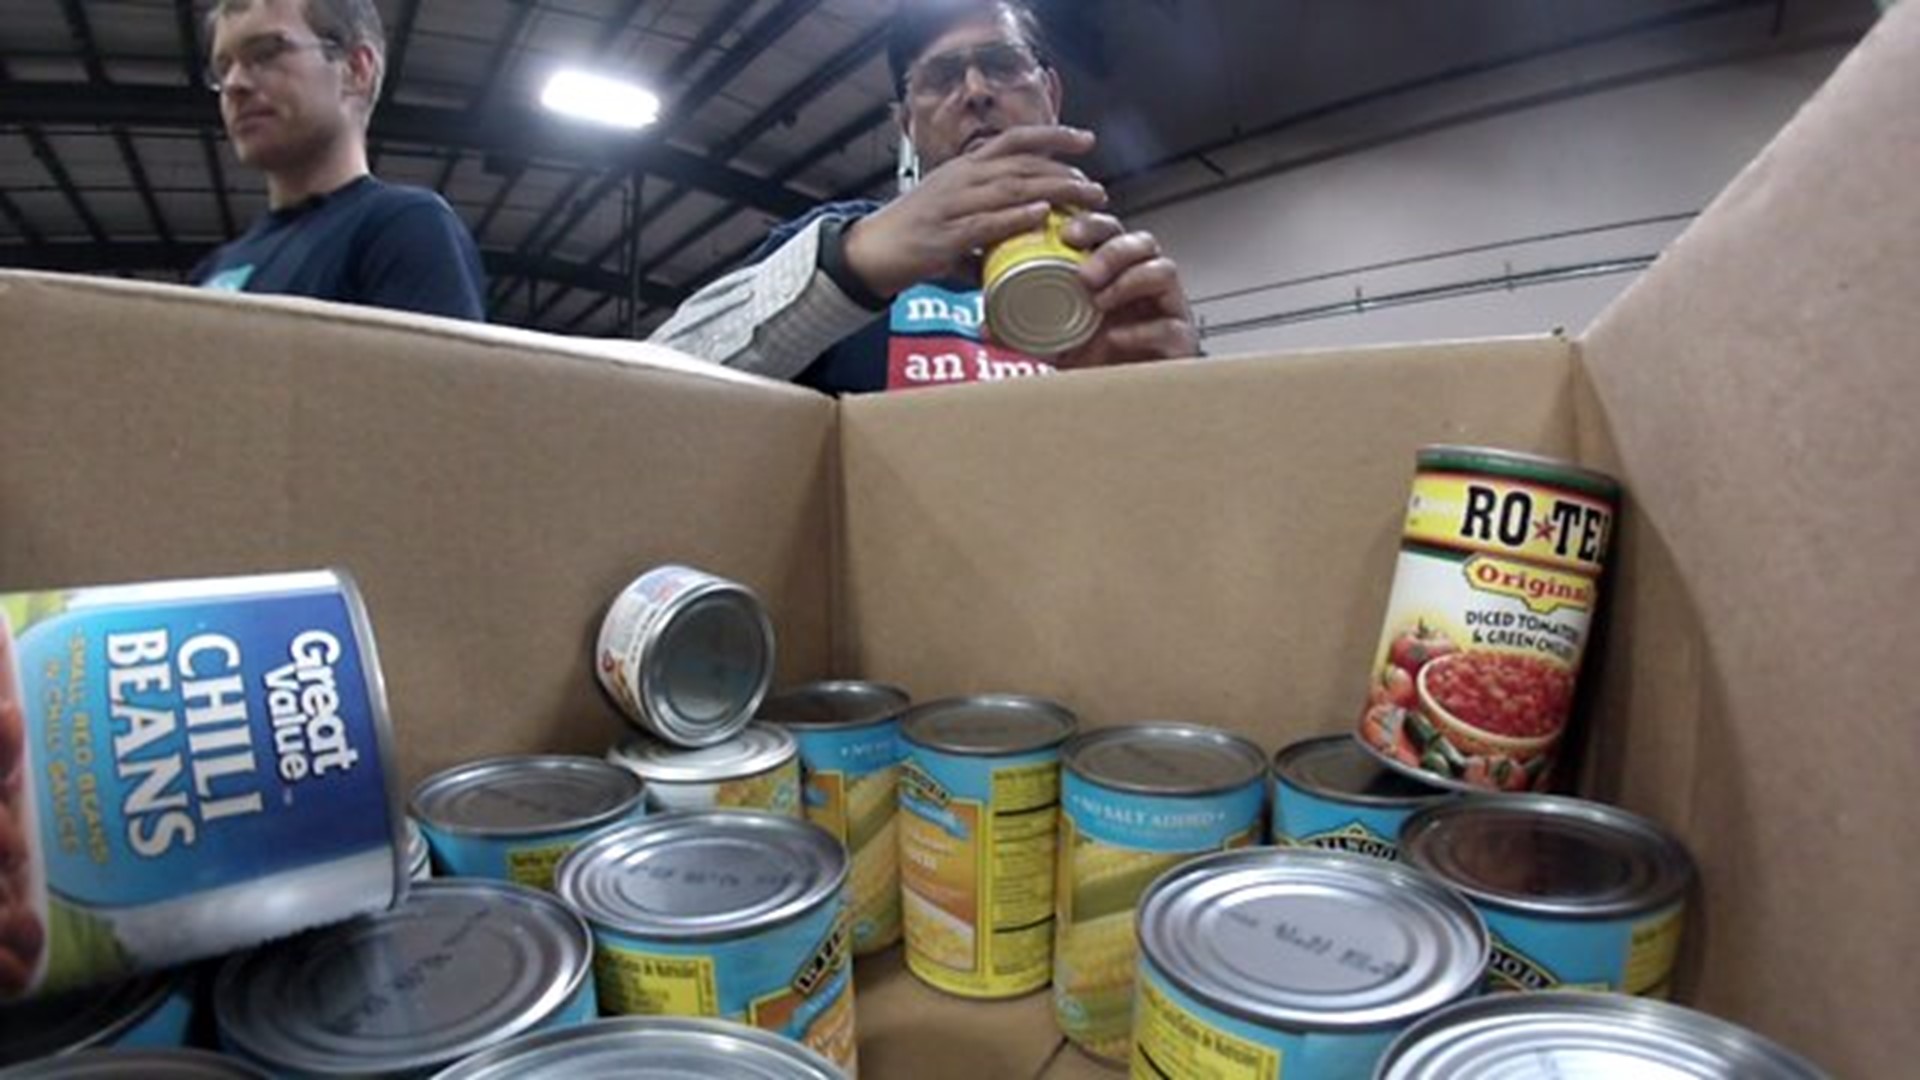 RiverBend Food Bank tries to keep up with growing hunger problem